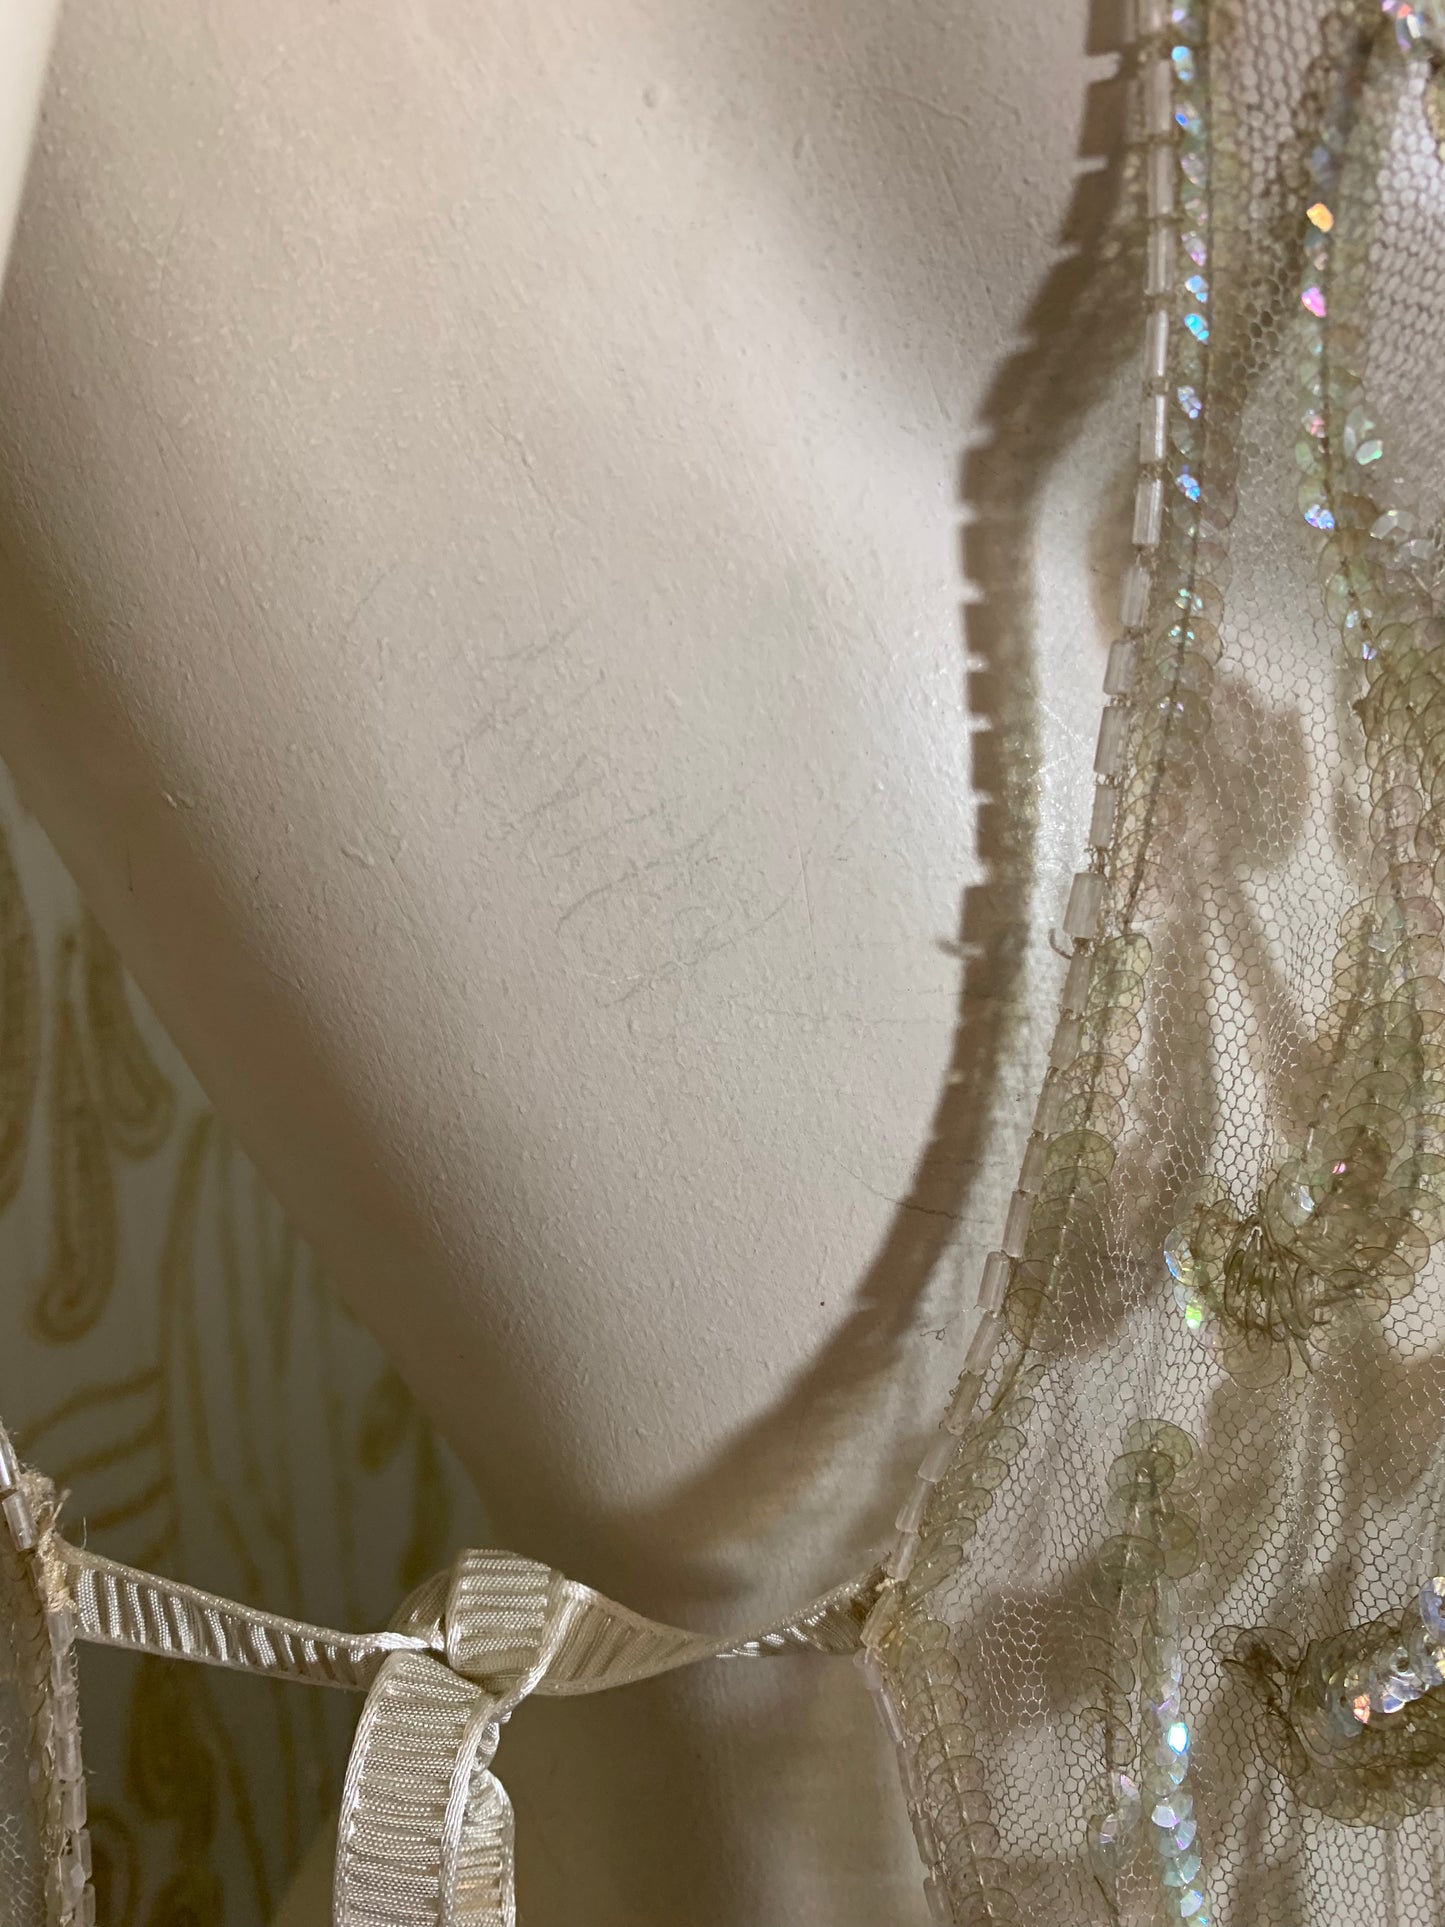 Timeless Iridescent Sequined and Beaded Sheer Netting Tabard Dress circa 1920s